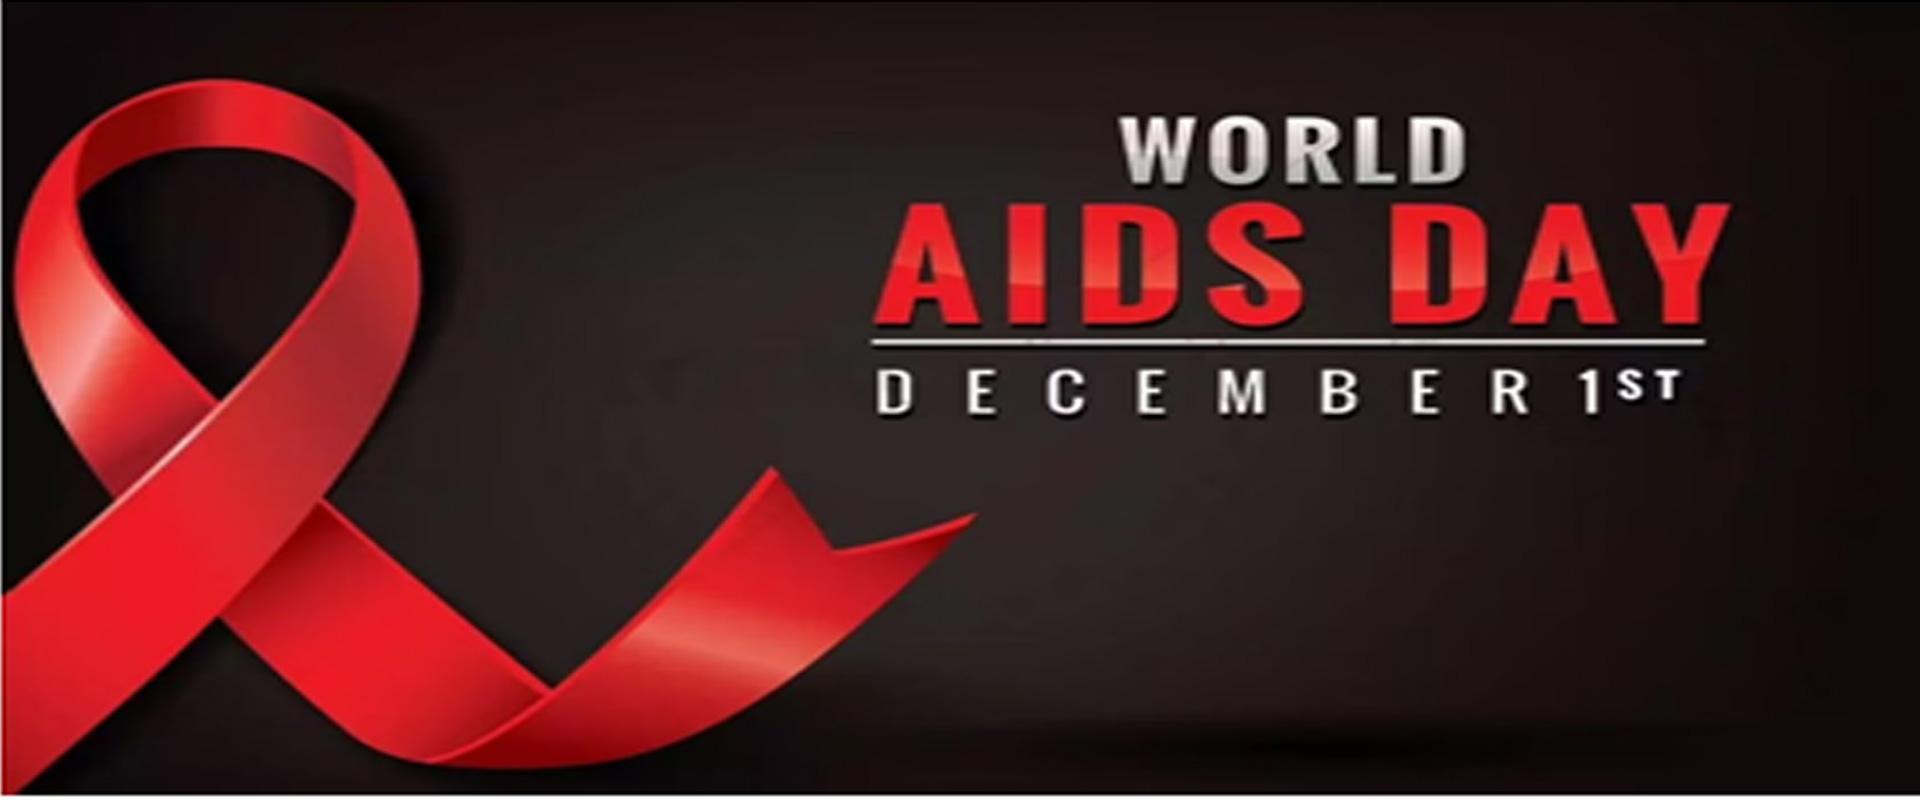 aids day 1